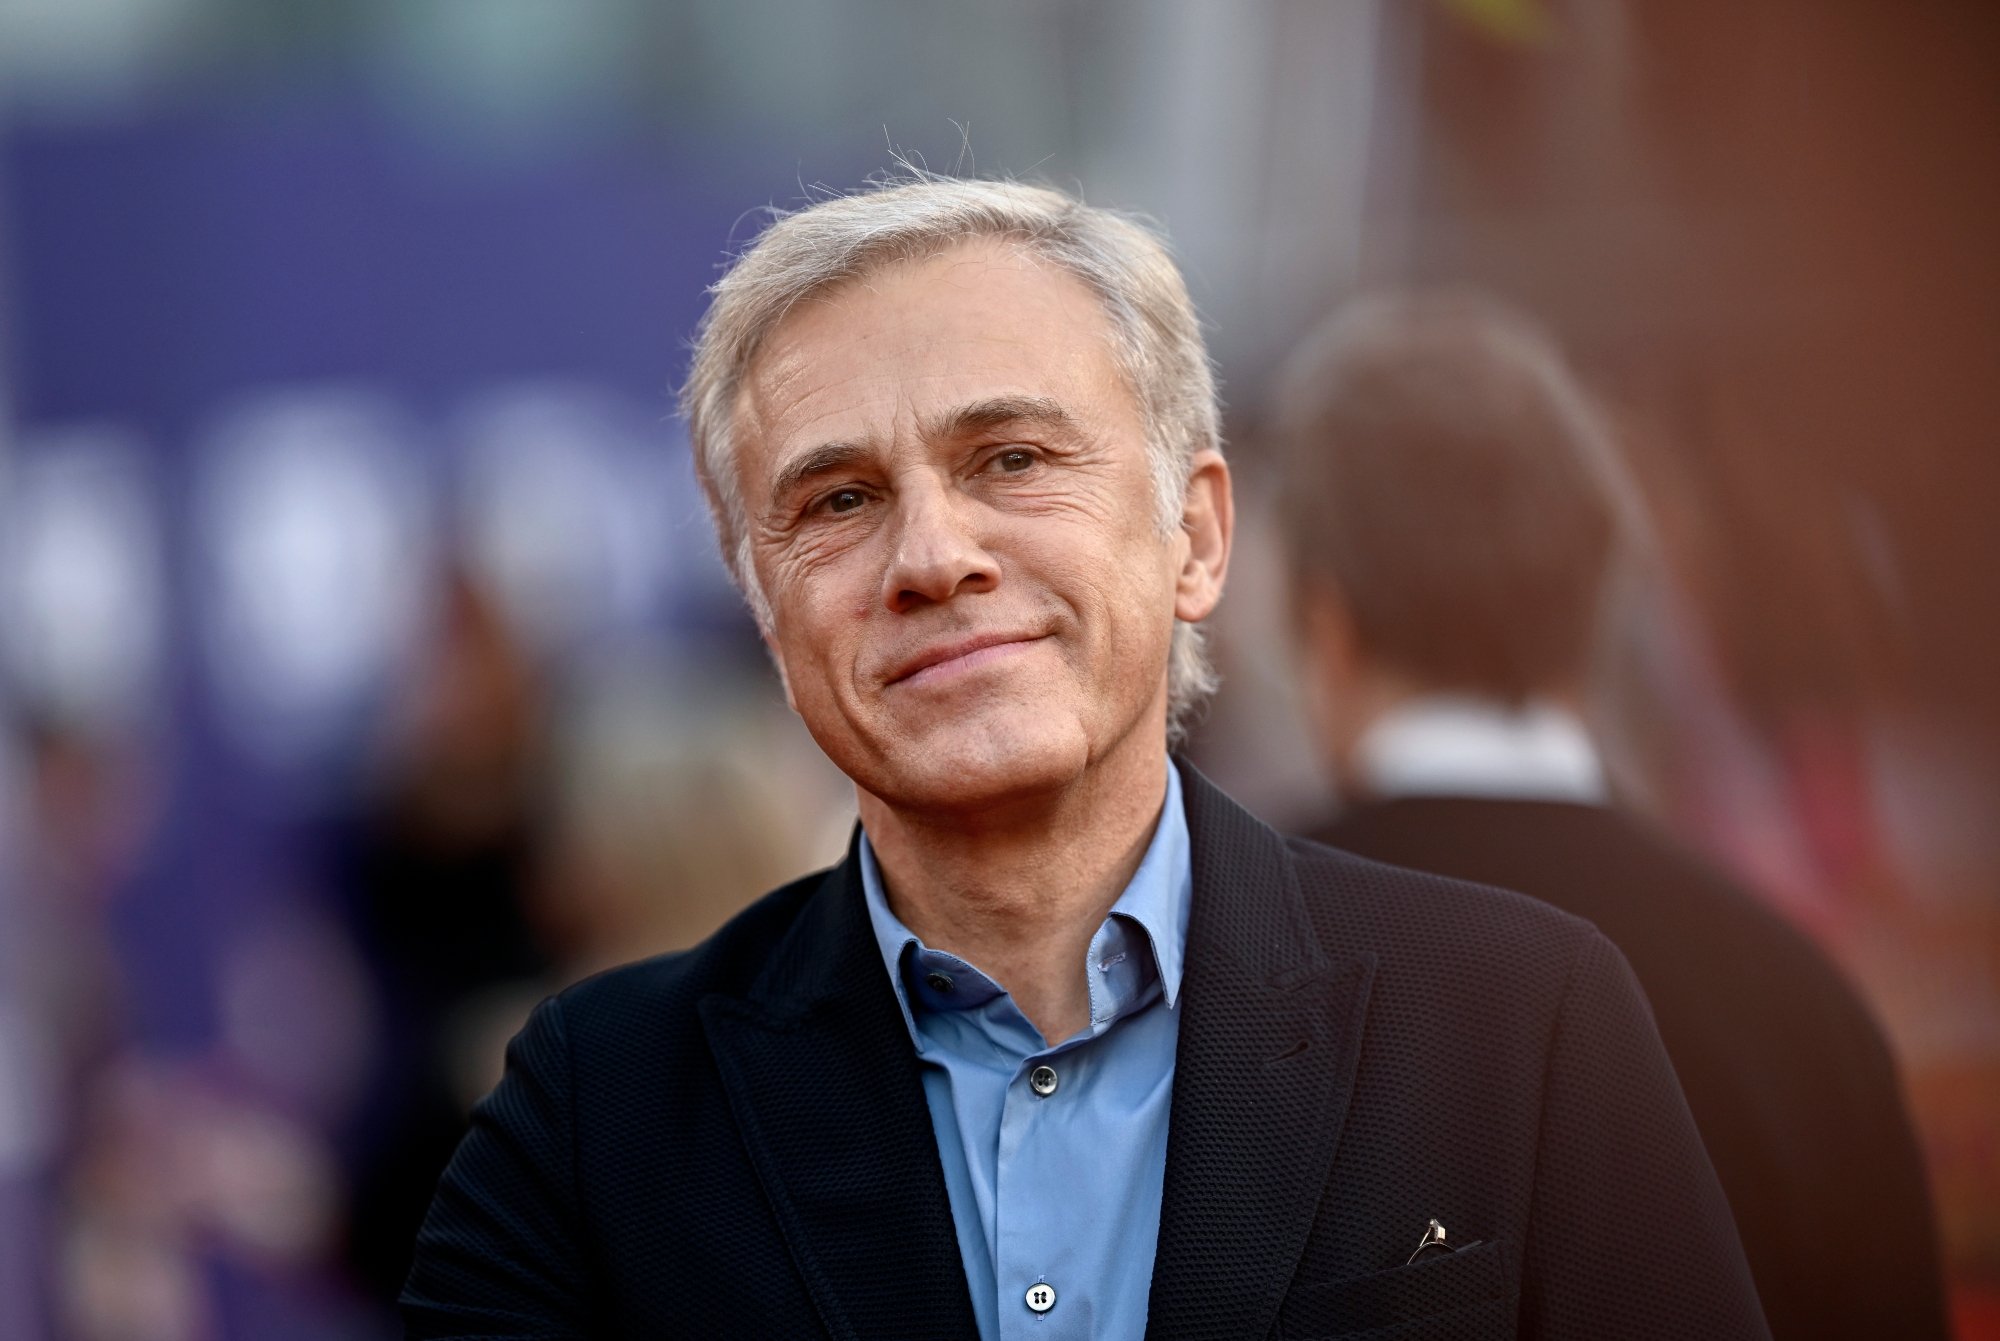 'Saturday Night Live' host Christoph Waltz with a slight smile. He's wearing a jacket and a blue dress shirt underneath.